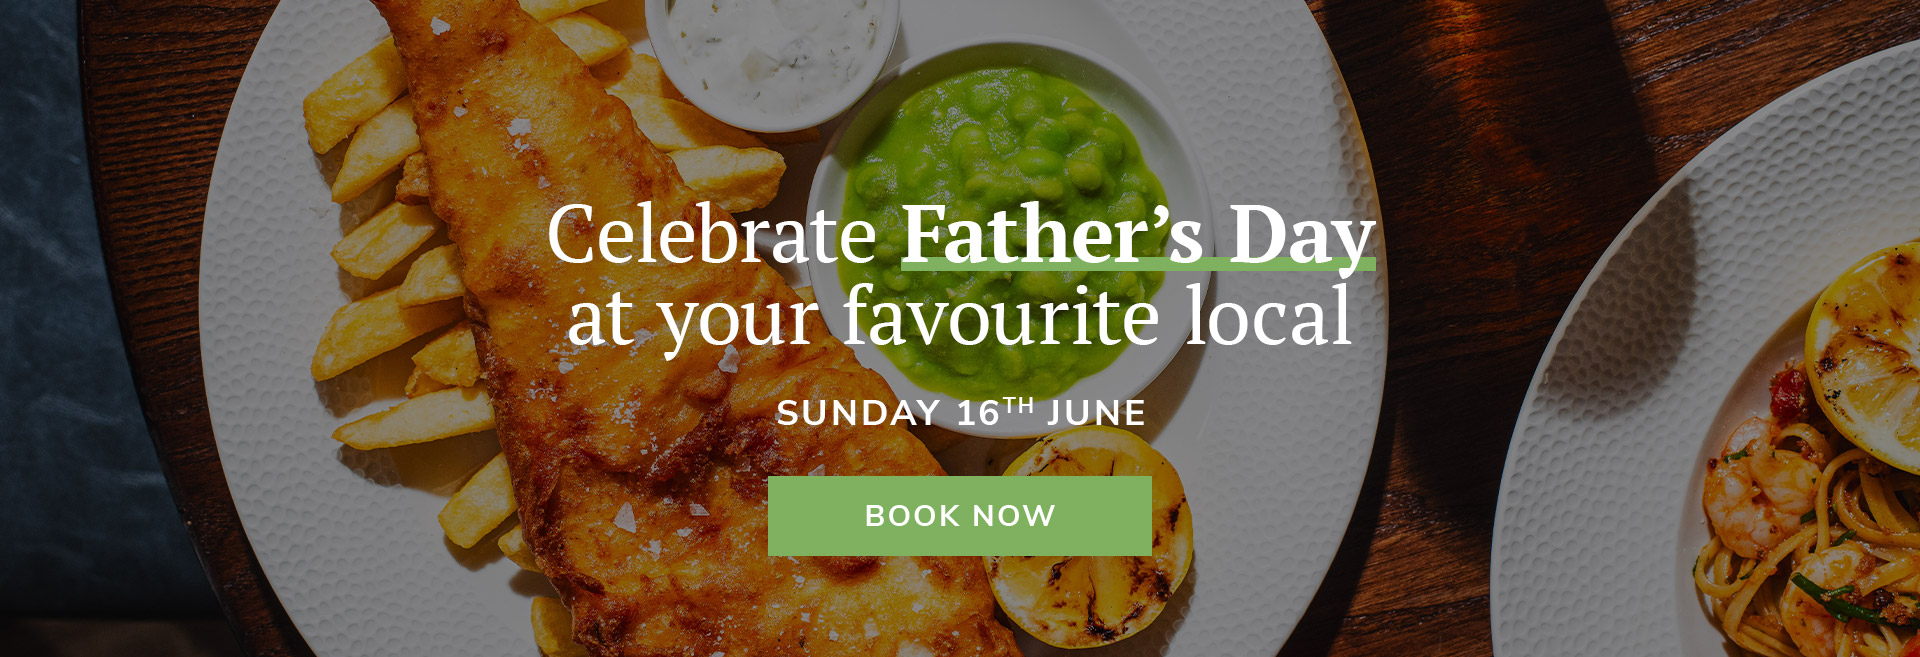 Father's Day at The White Hart Crystal Palace